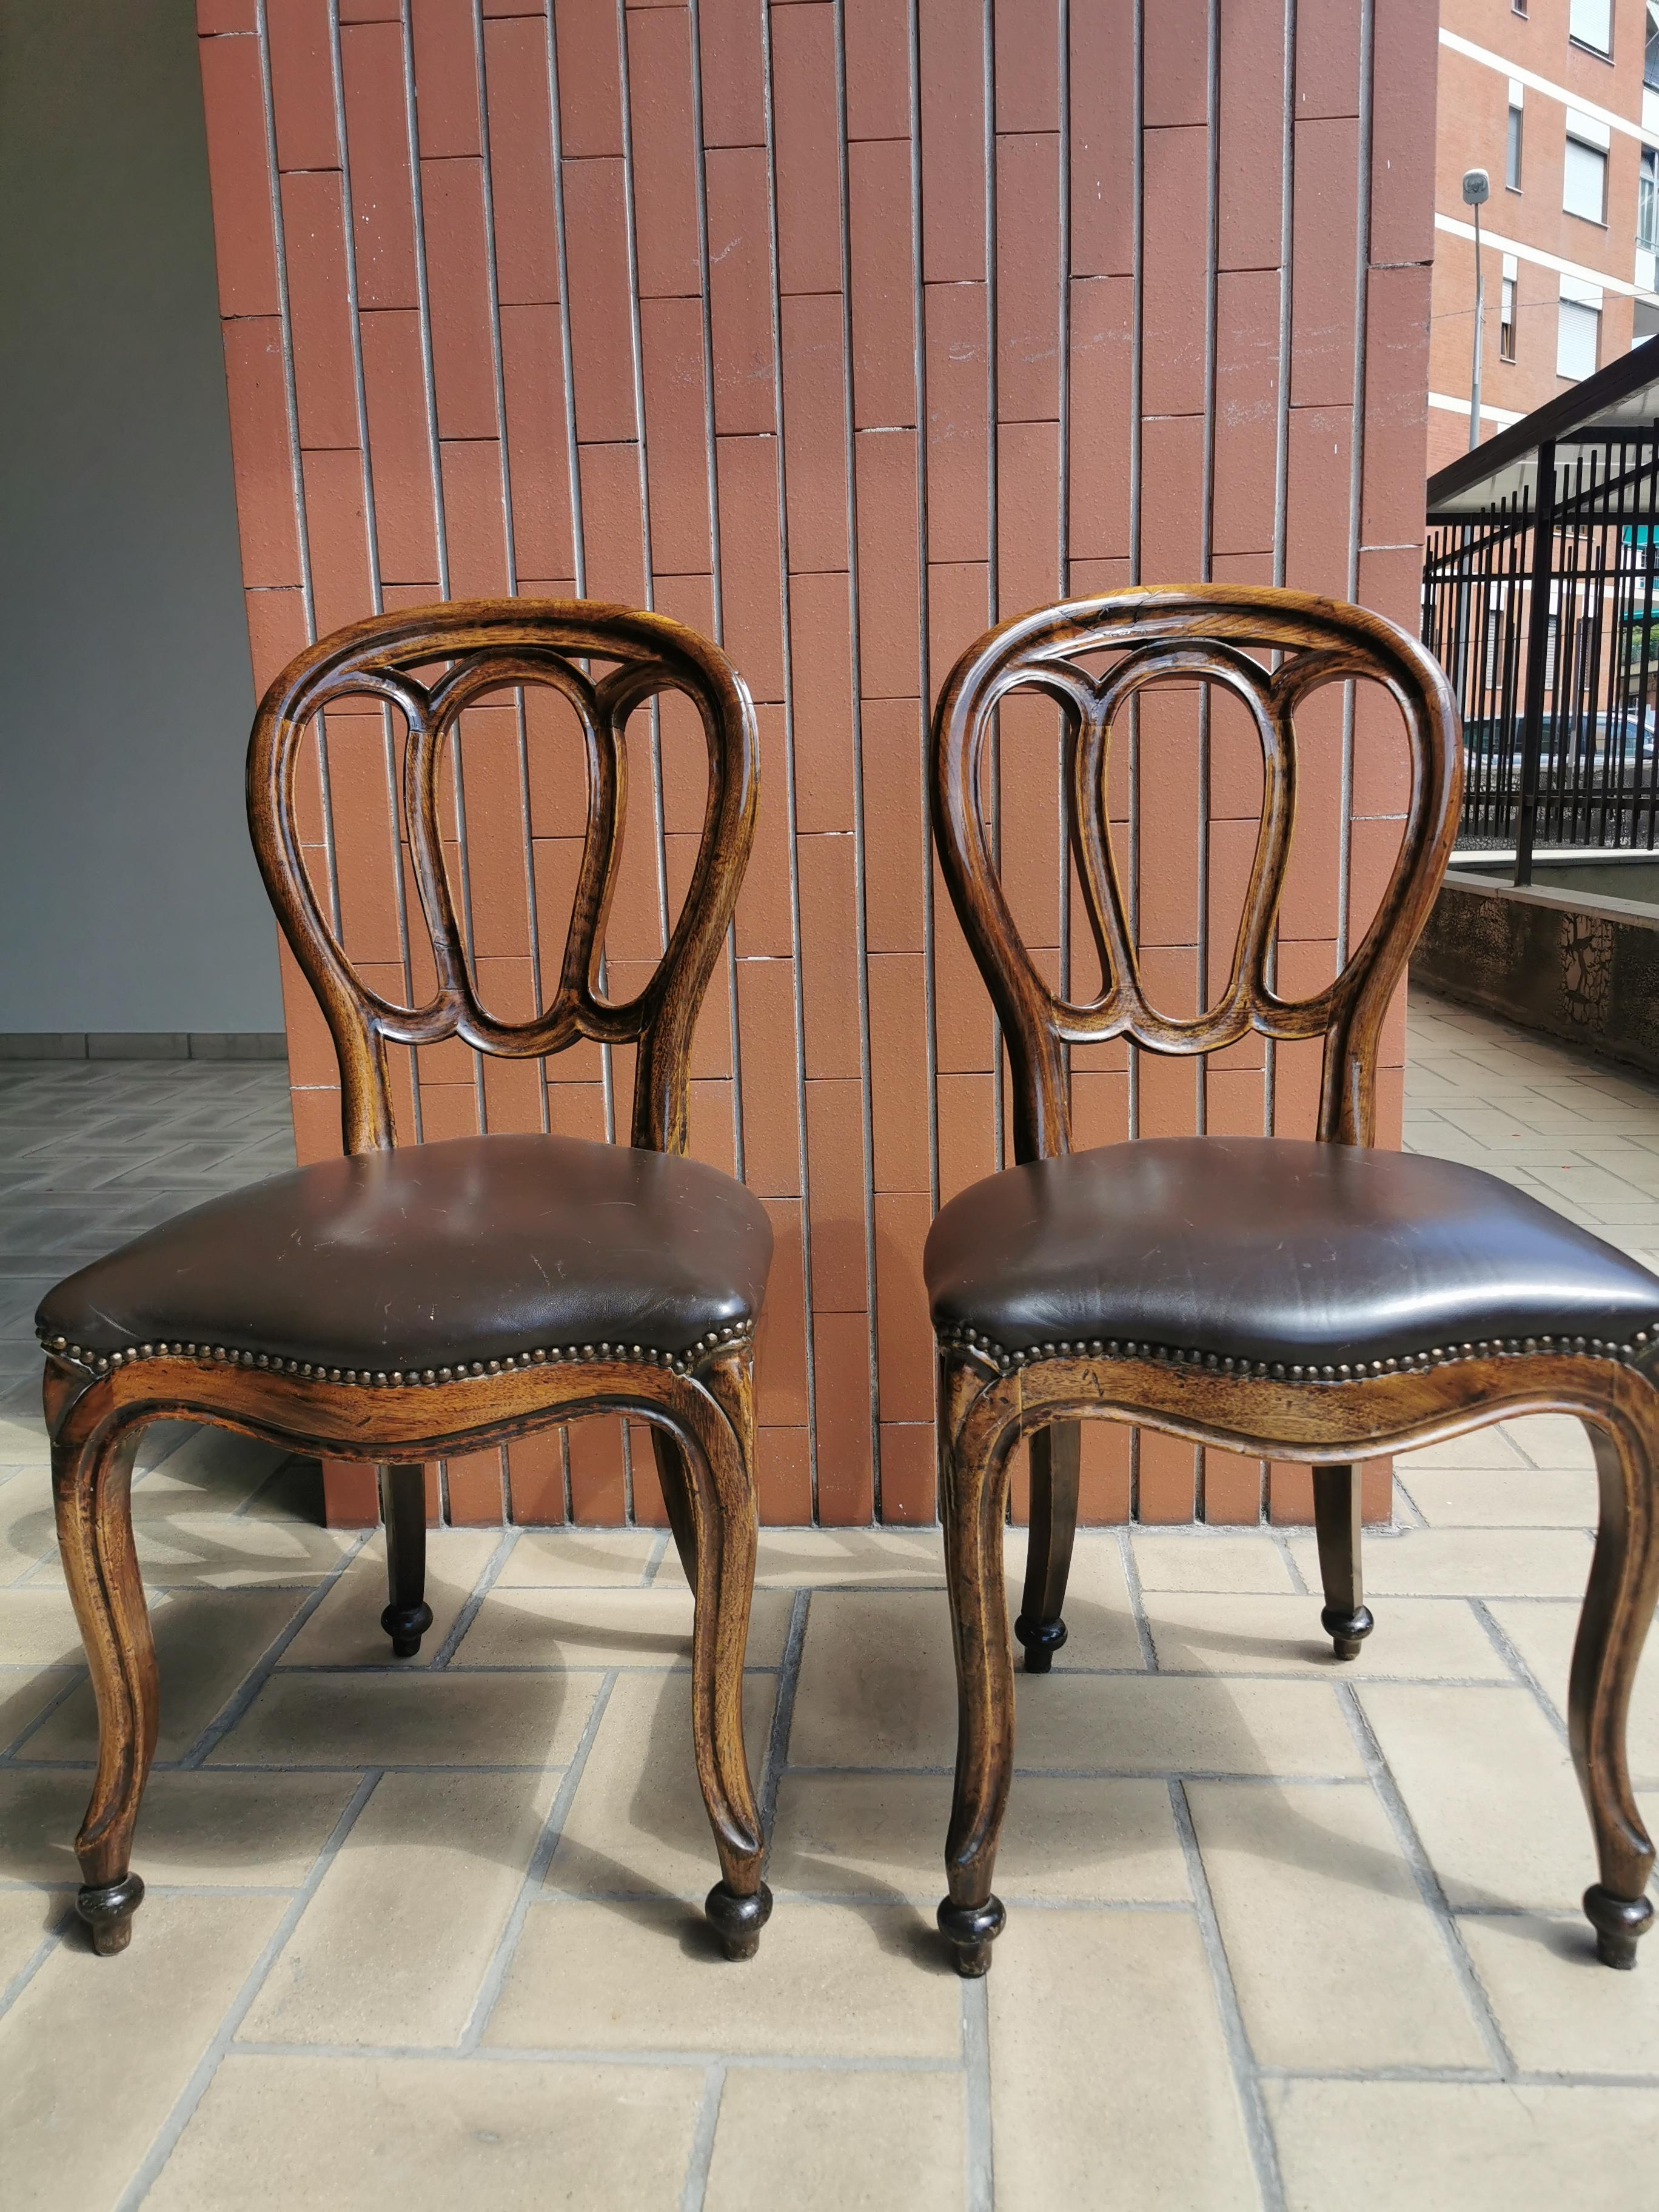 Pair of 19th Century Side Chairs, Walnut, Leather, circa 1840 Italy For Sale 2